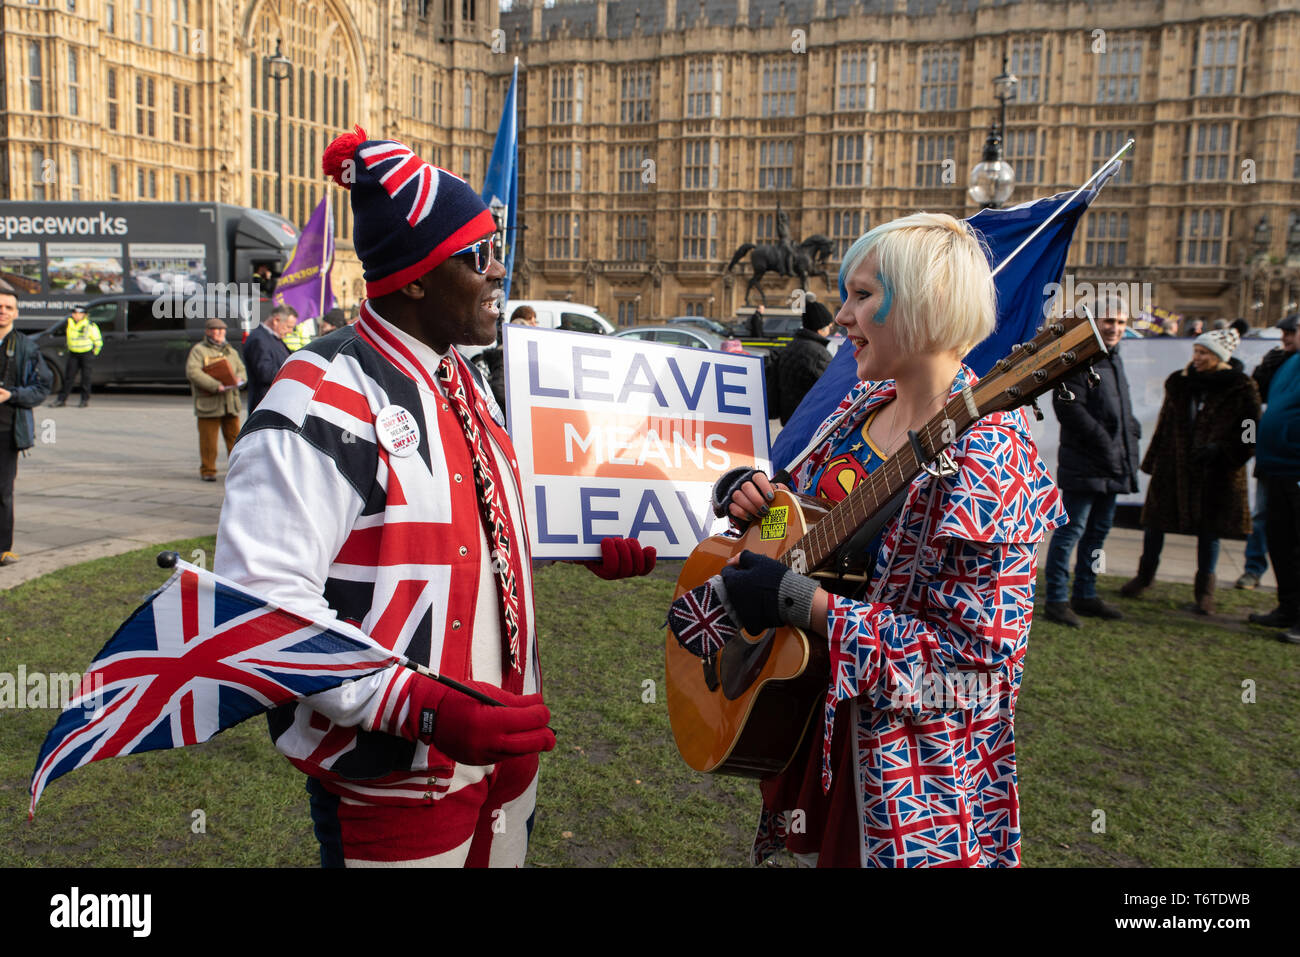 Joseph Afrane, 55, security agent and pro-Brexit, talks with Madeleina Kay, political activist, artist and Remainer, Westminster, London. Jan. 2019 Stock Photo